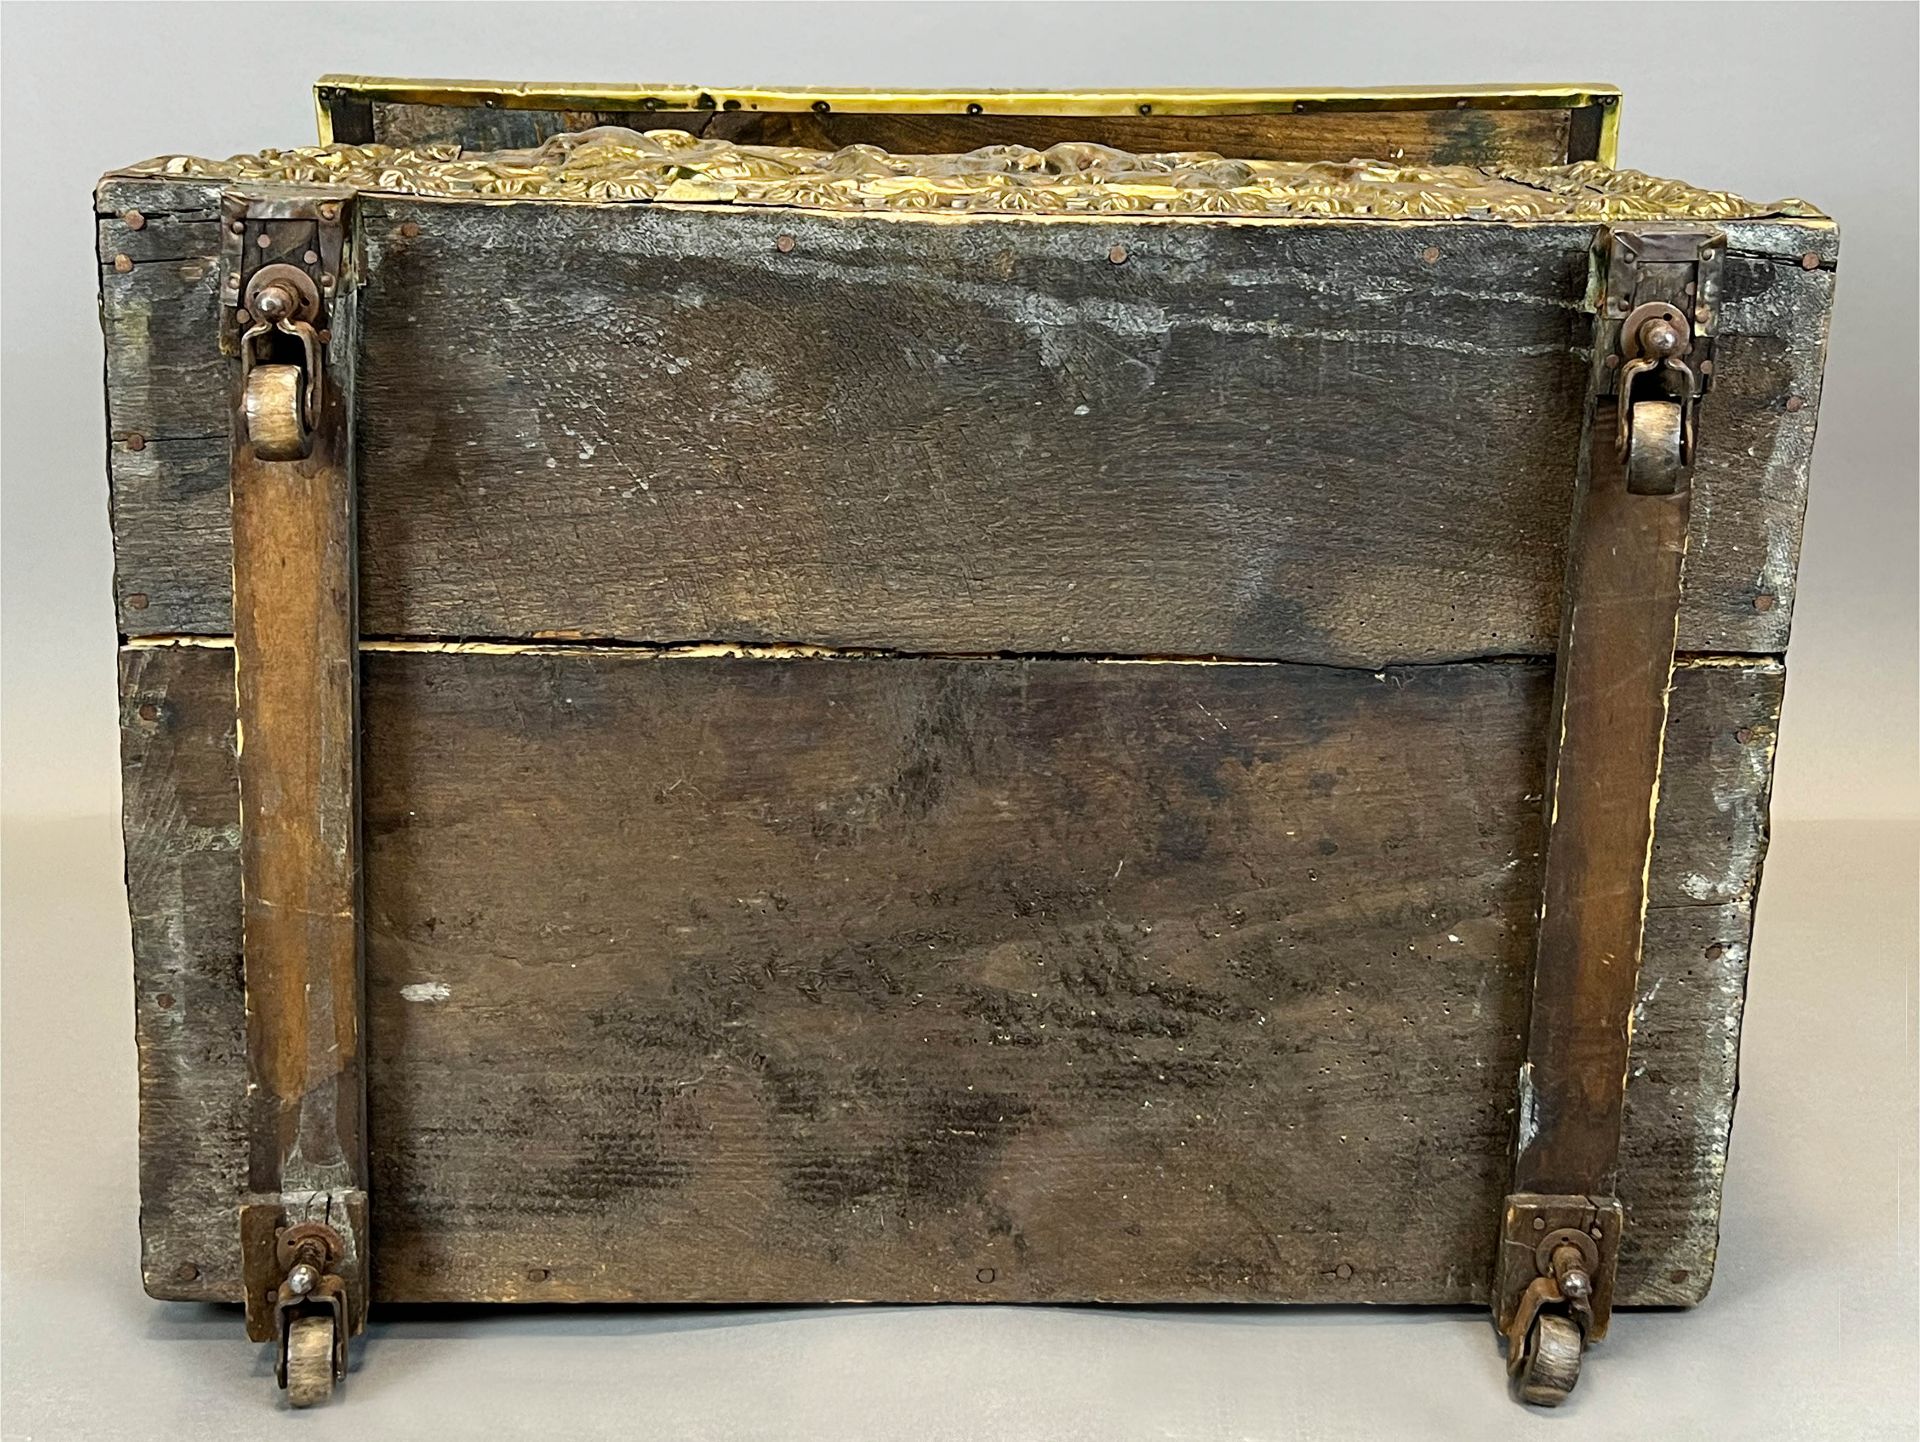 Small wooden chest with brass plate decoration. Probably 19th century. - Image 6 of 15